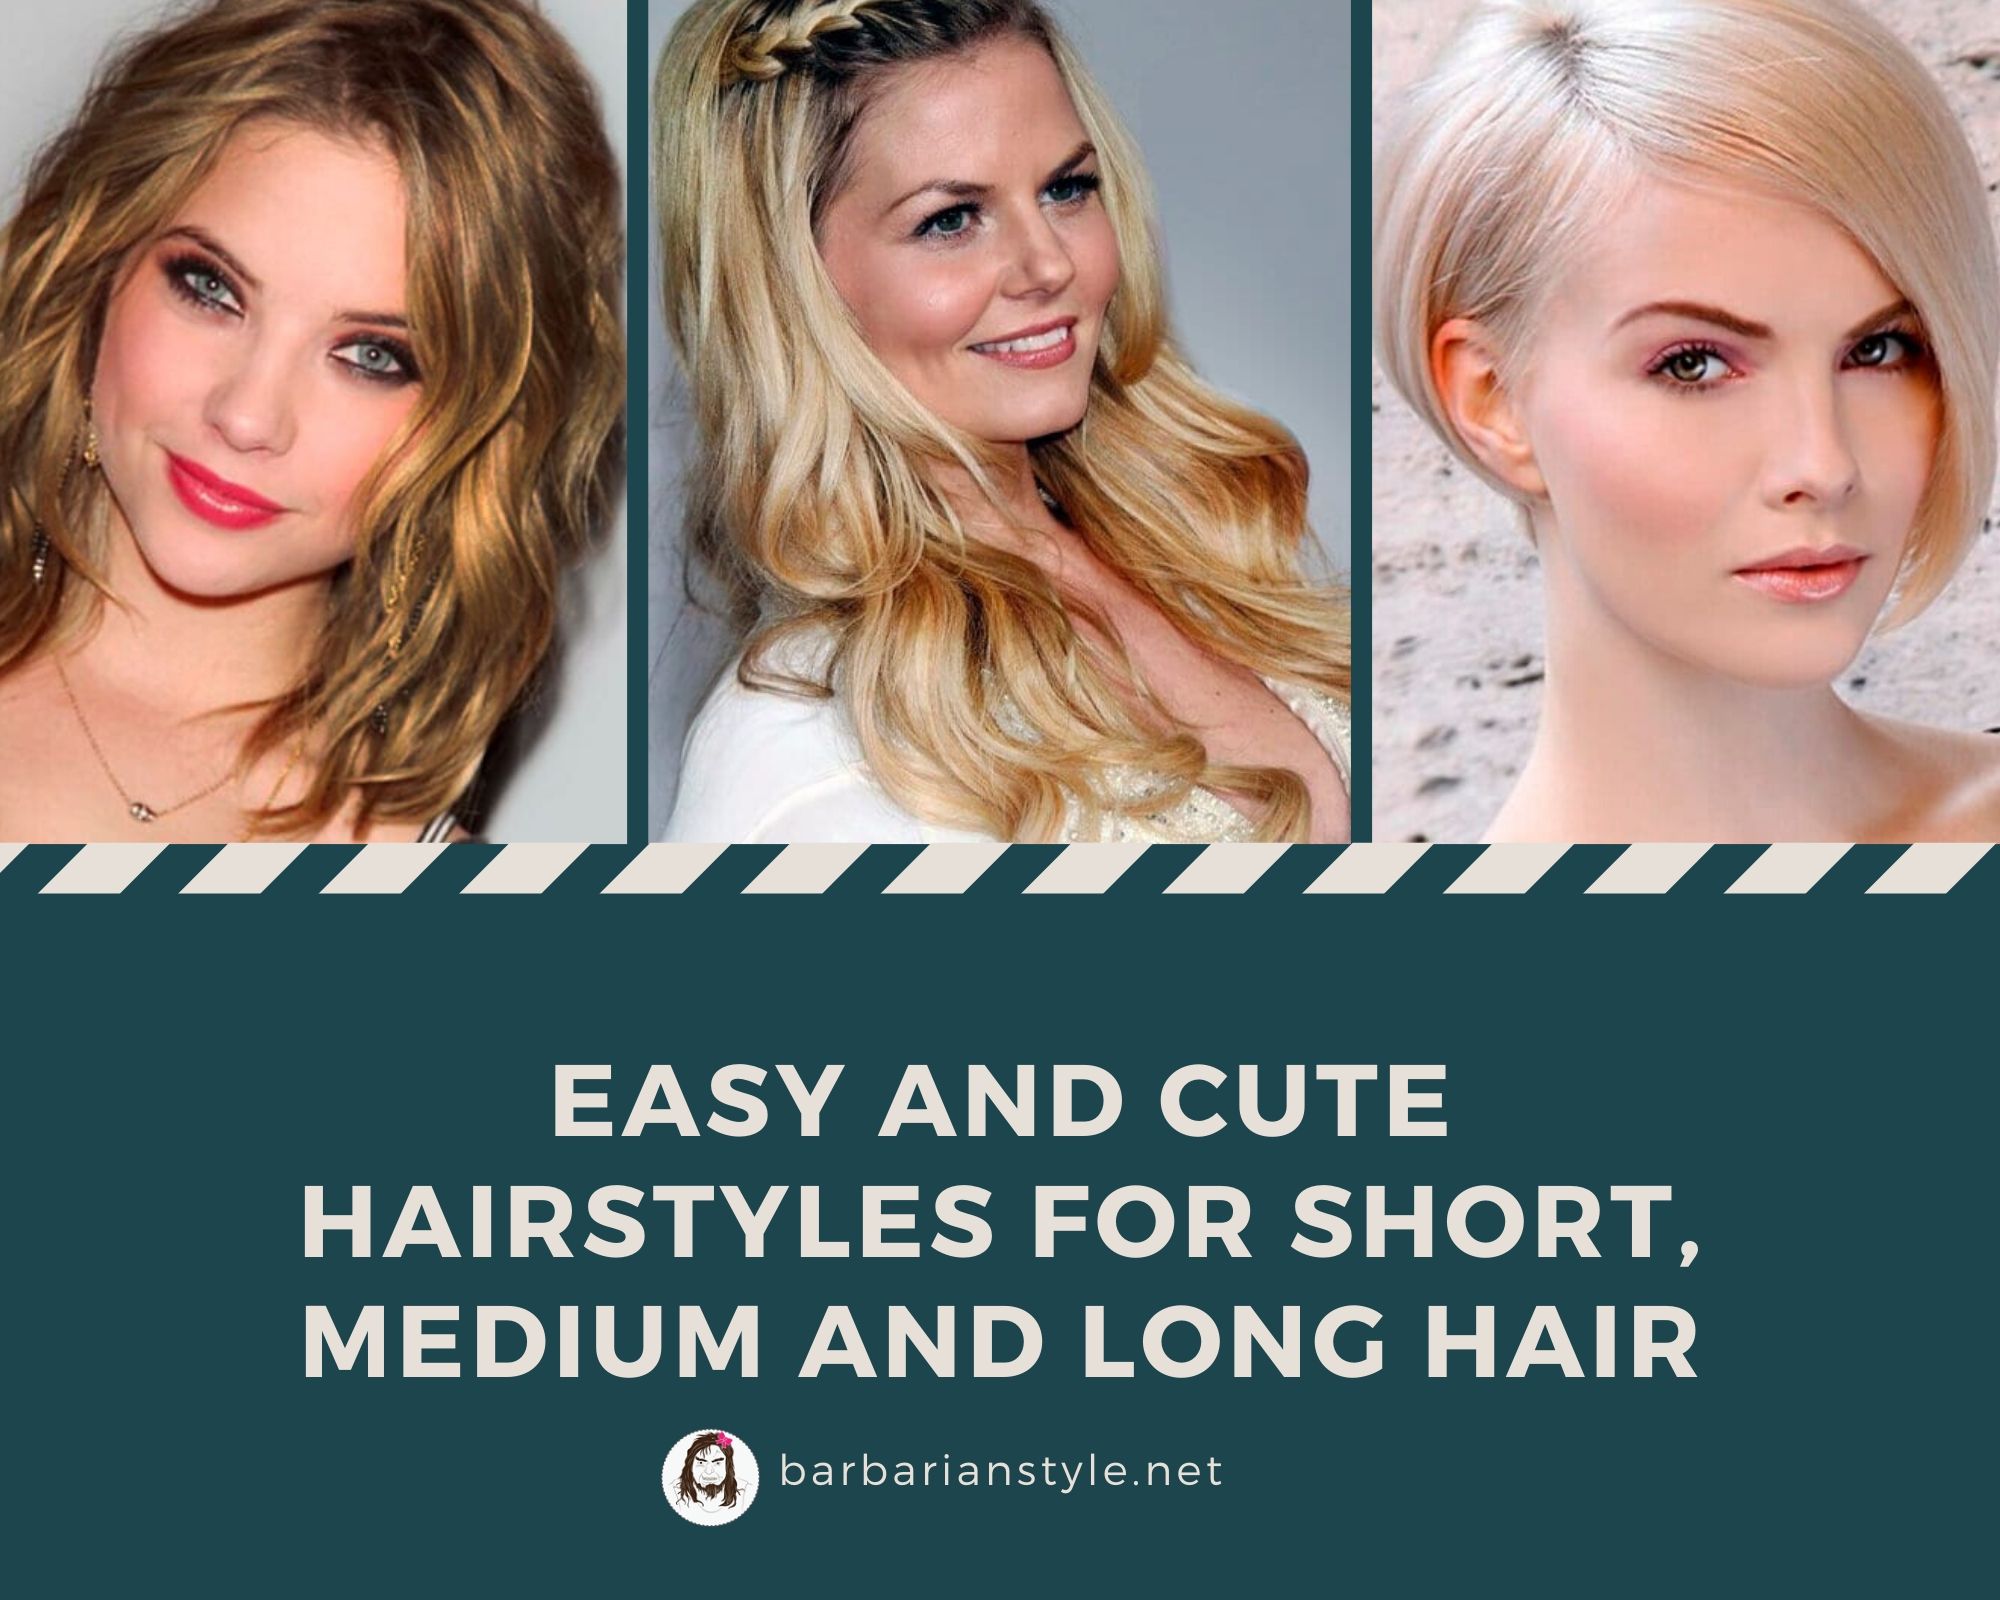 Easy and Cute Hairstyles for Short, Medium and Long Hair